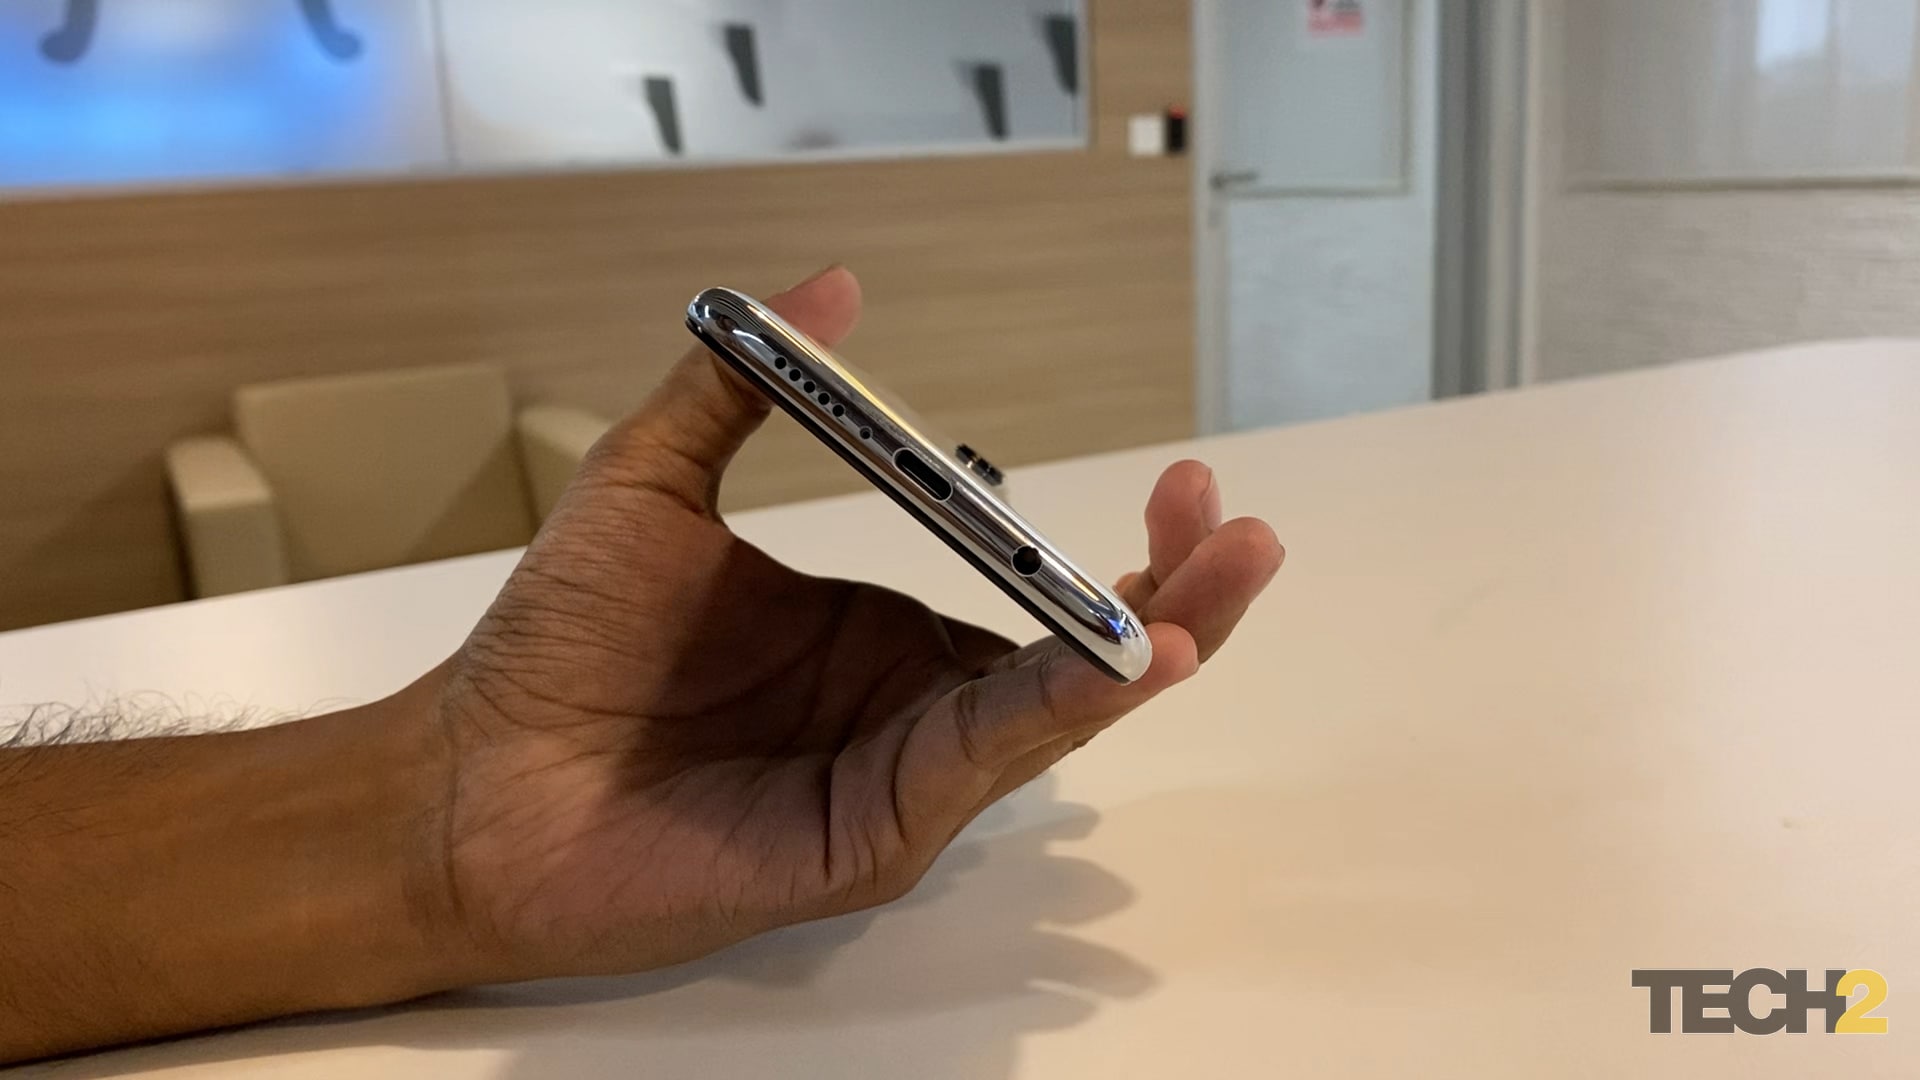 Redmi Note 8 Pro is a thin phone.